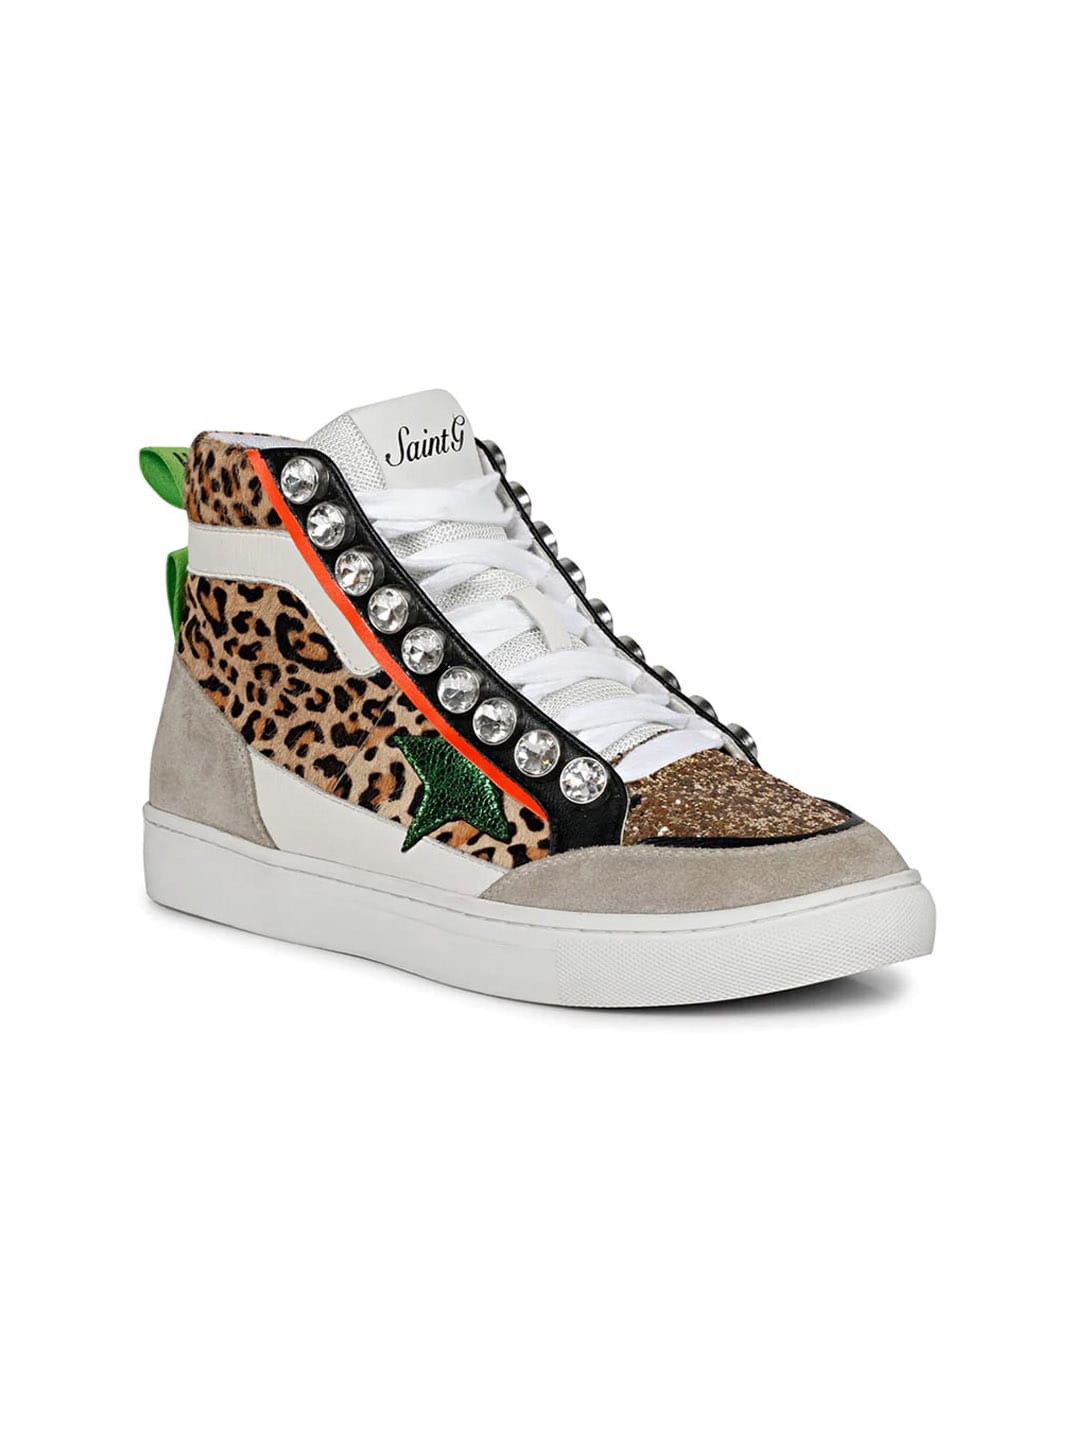 Saint G Women Multicoloured Printed Leather Sneakers Price in India